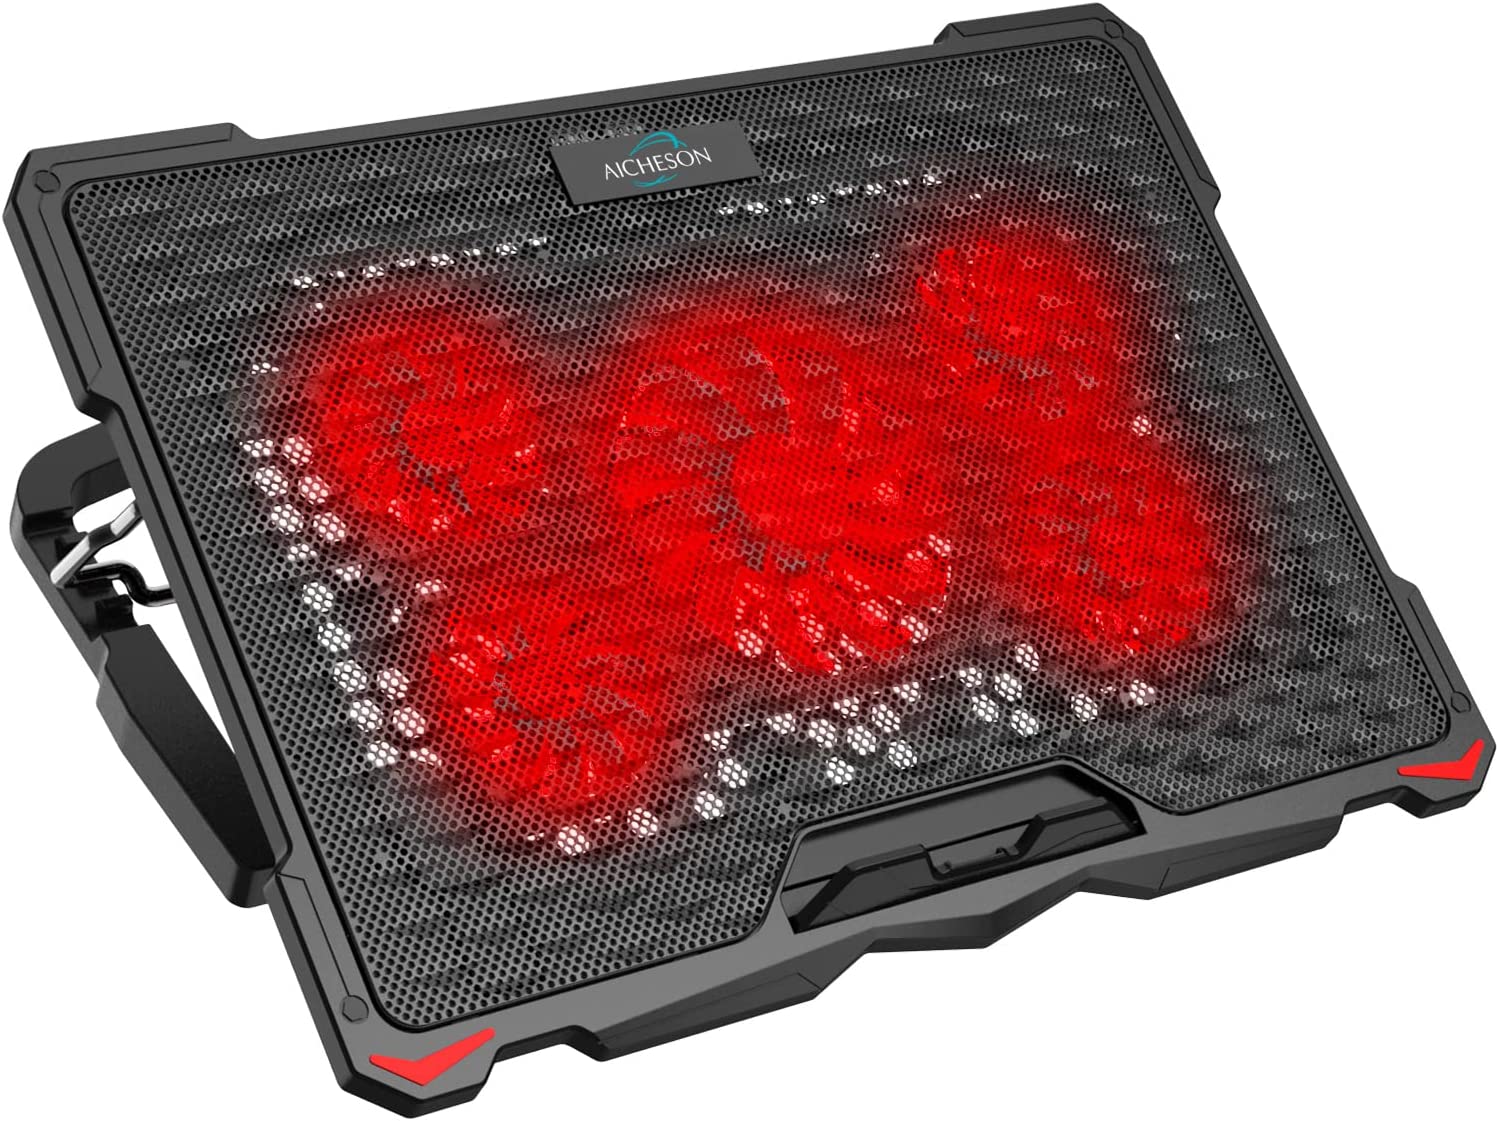 AICHESON Laptop Fan Cooling Pad for 15.6-17.3 Inch Laptops, 5 Cooler Fans with Red Lights Computer Desk Cooling Stand Chiller Mat, S035RED